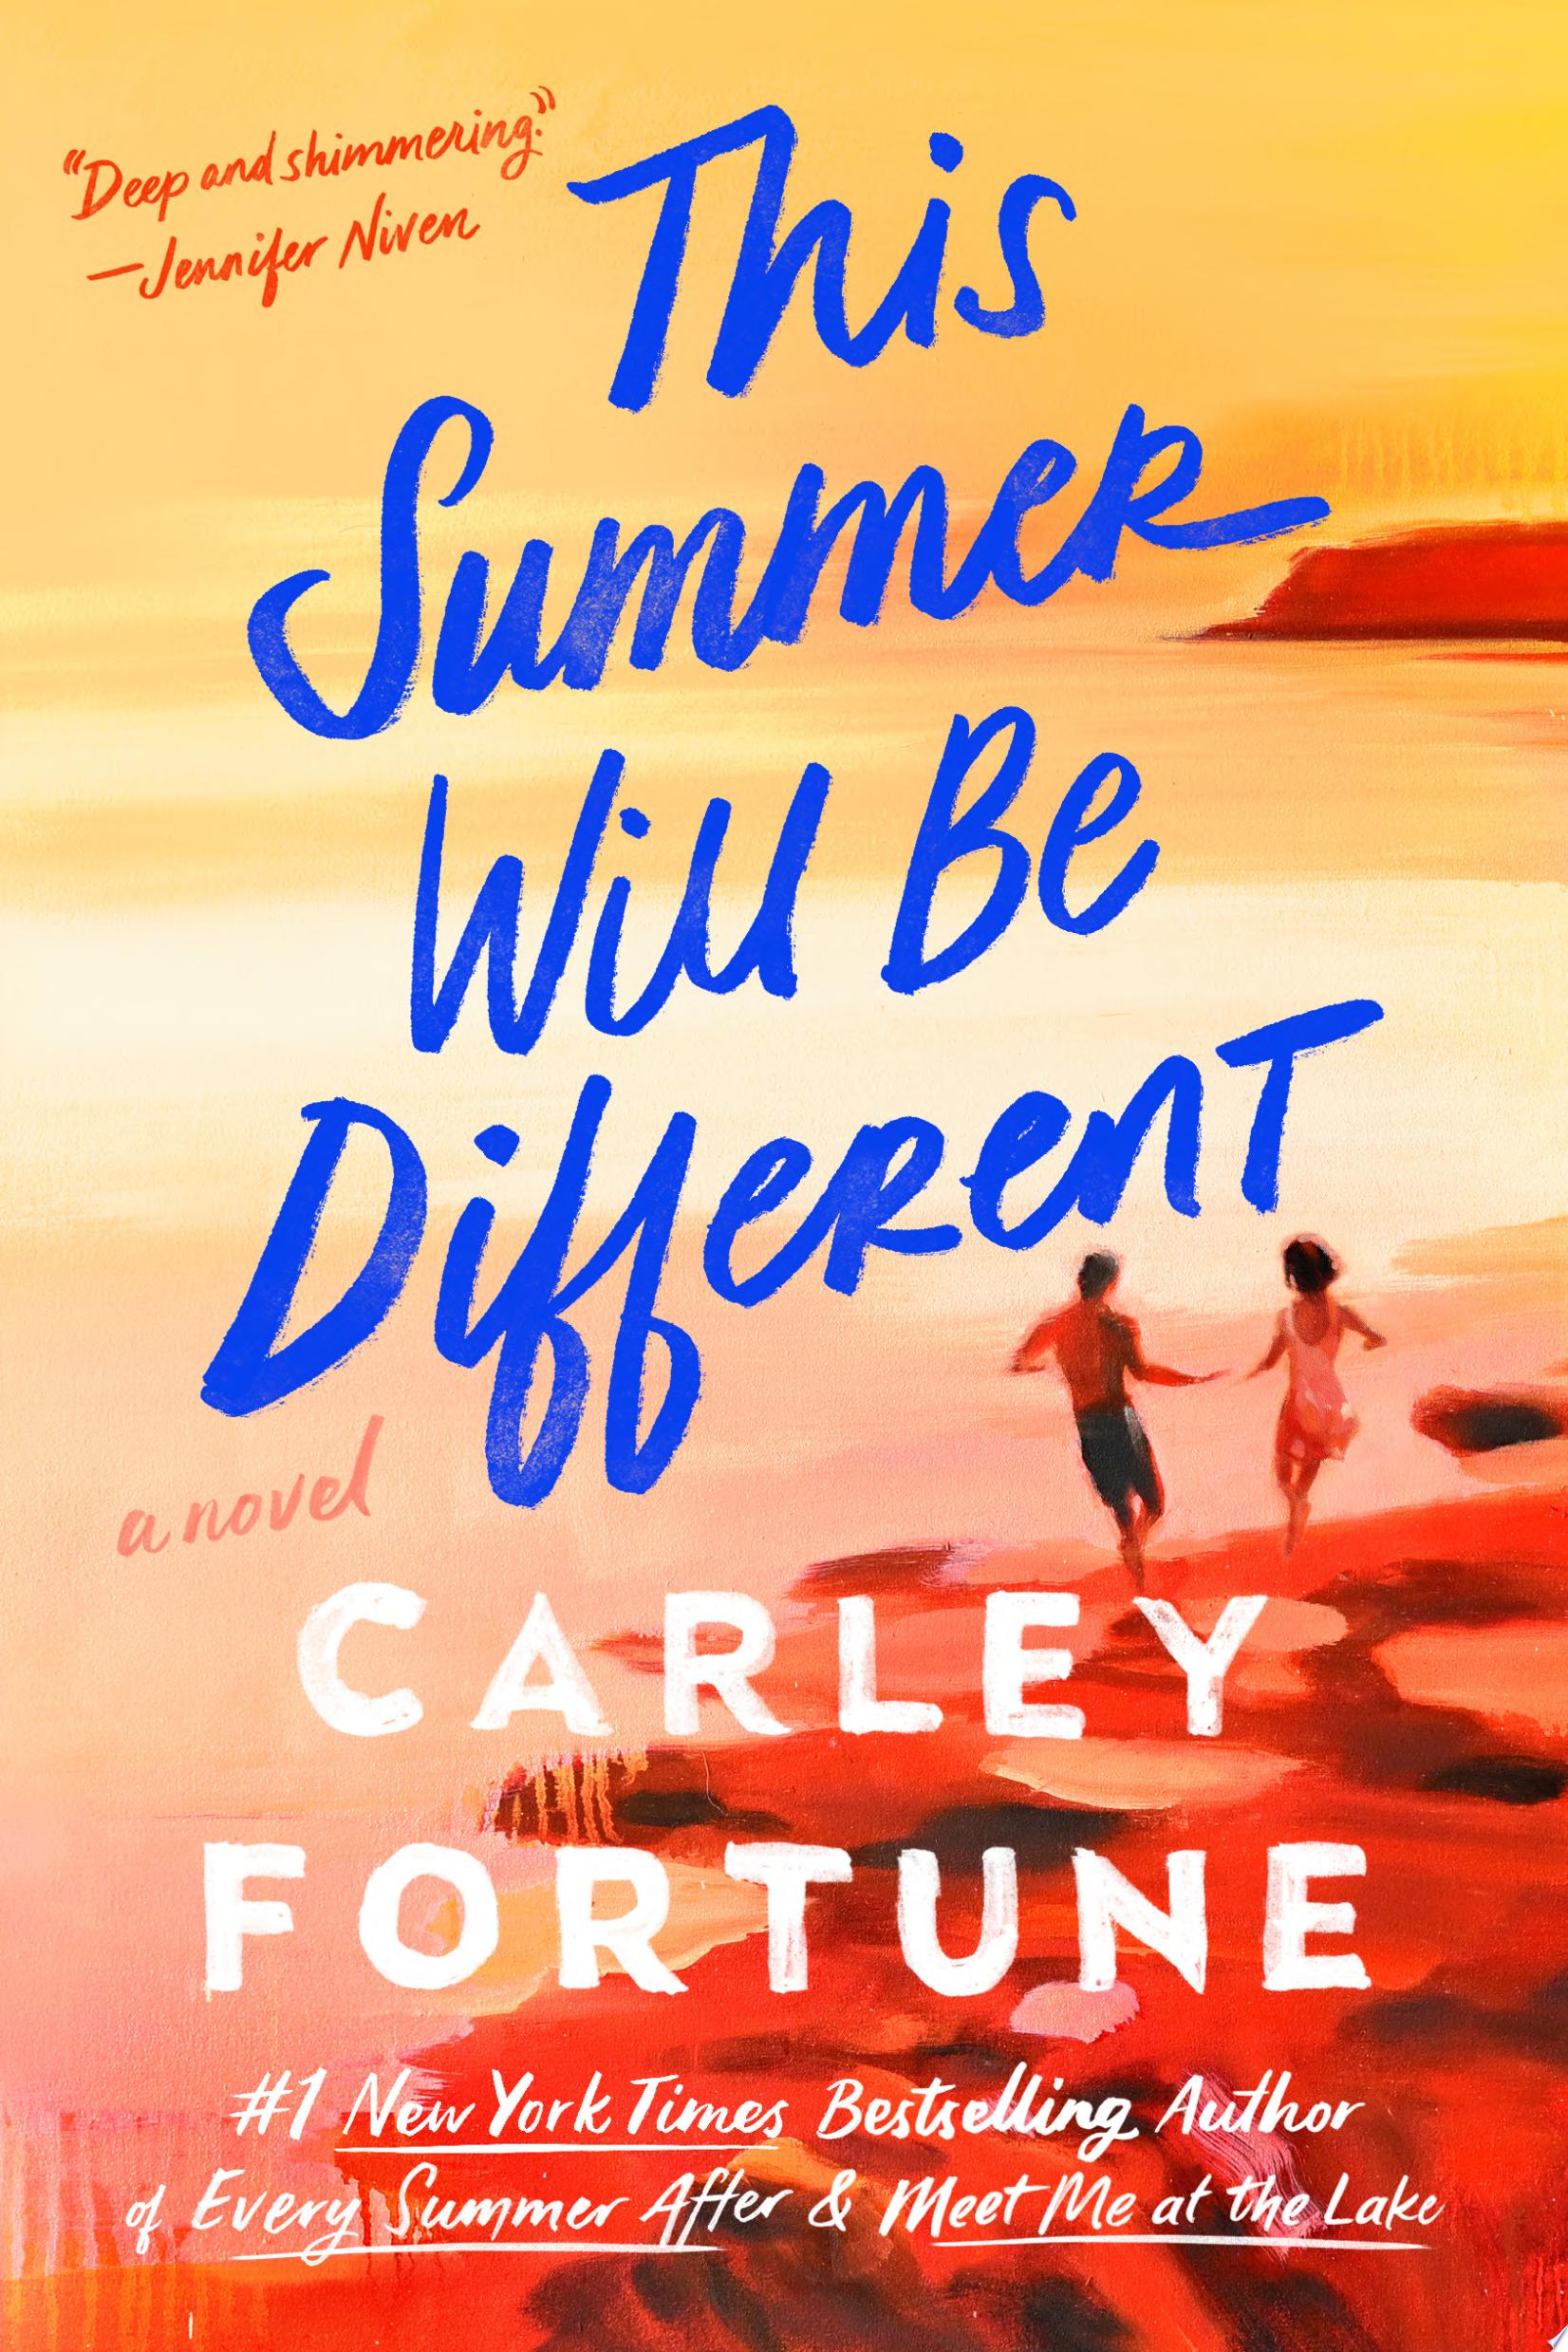 Image for "This Summer Will Be Different"